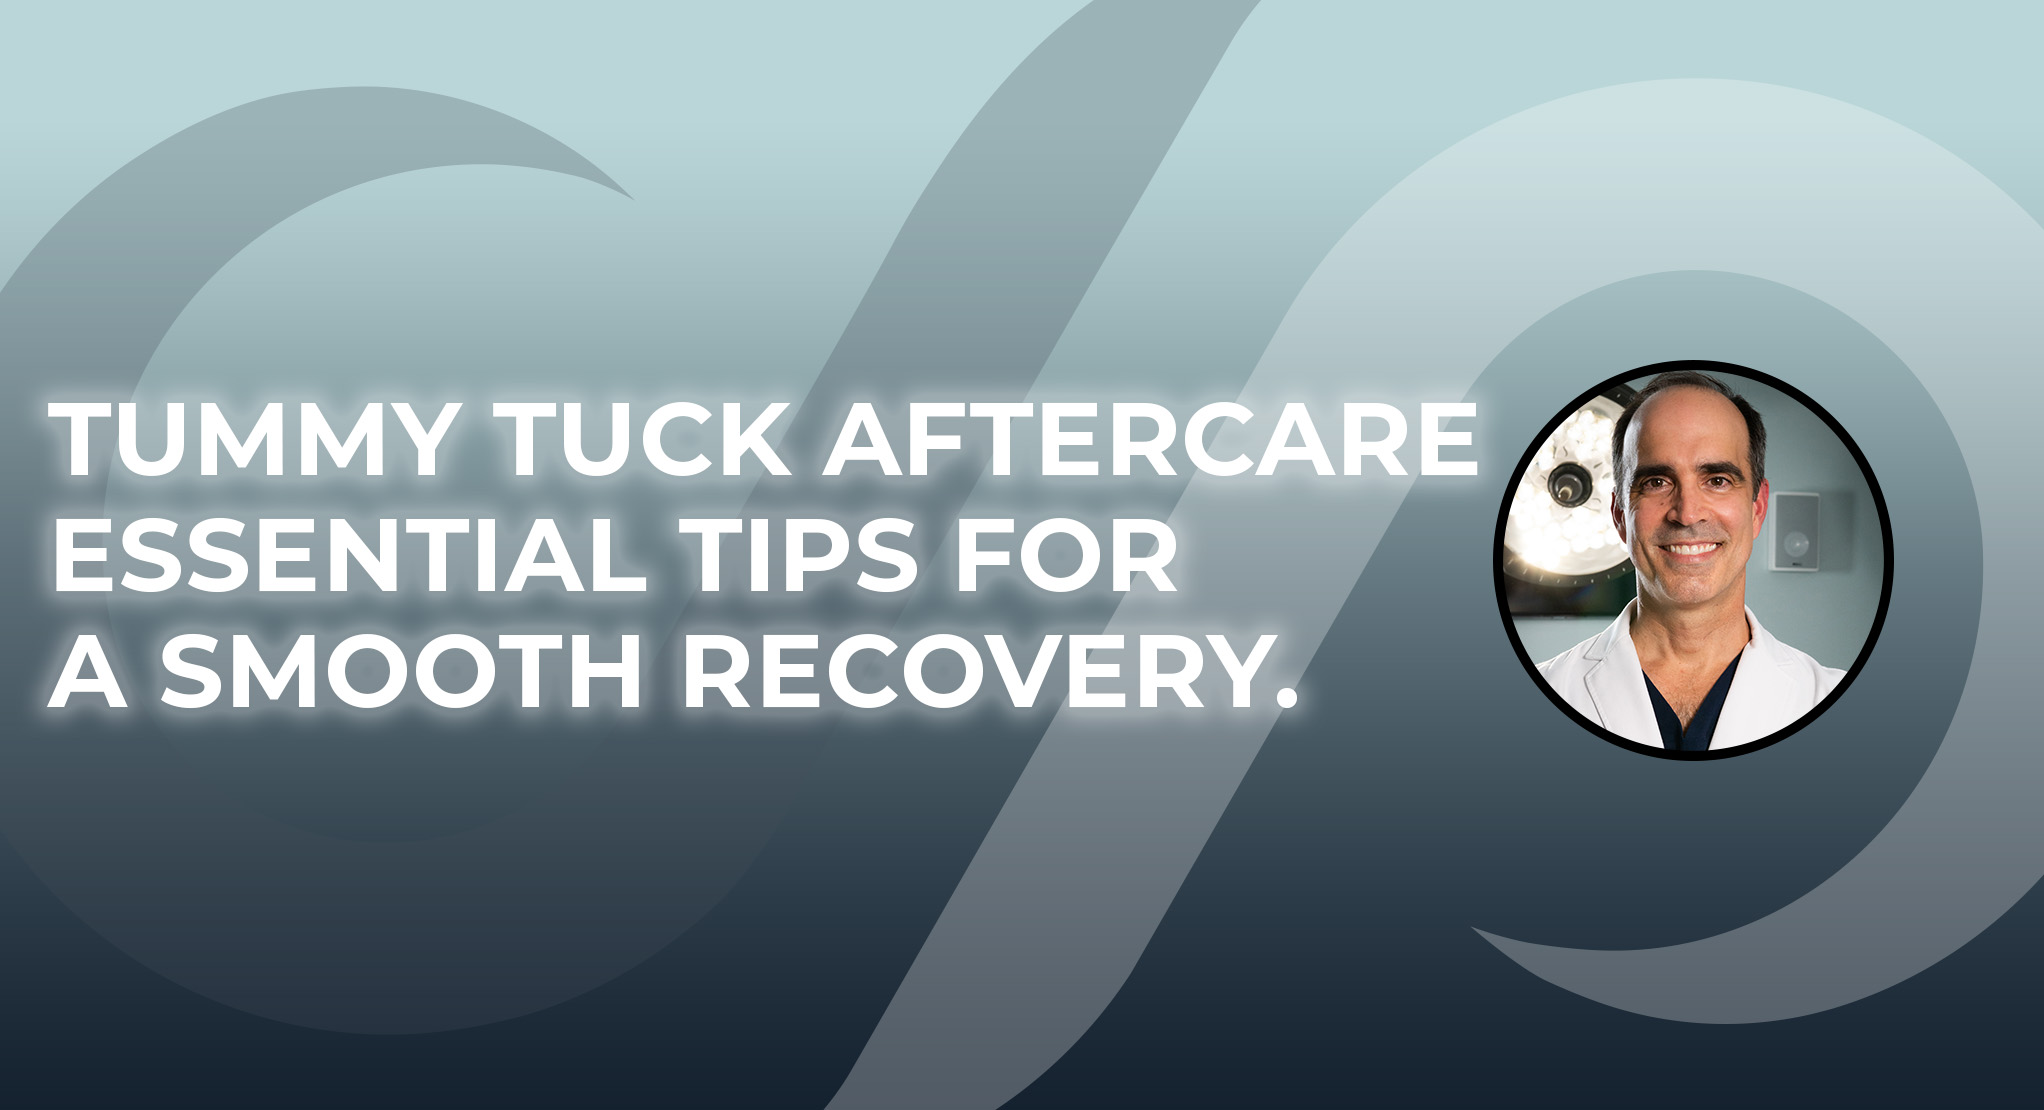 Tummy Tuck Recovery: Timeline, Tips, and More - Power Plastic Surgery